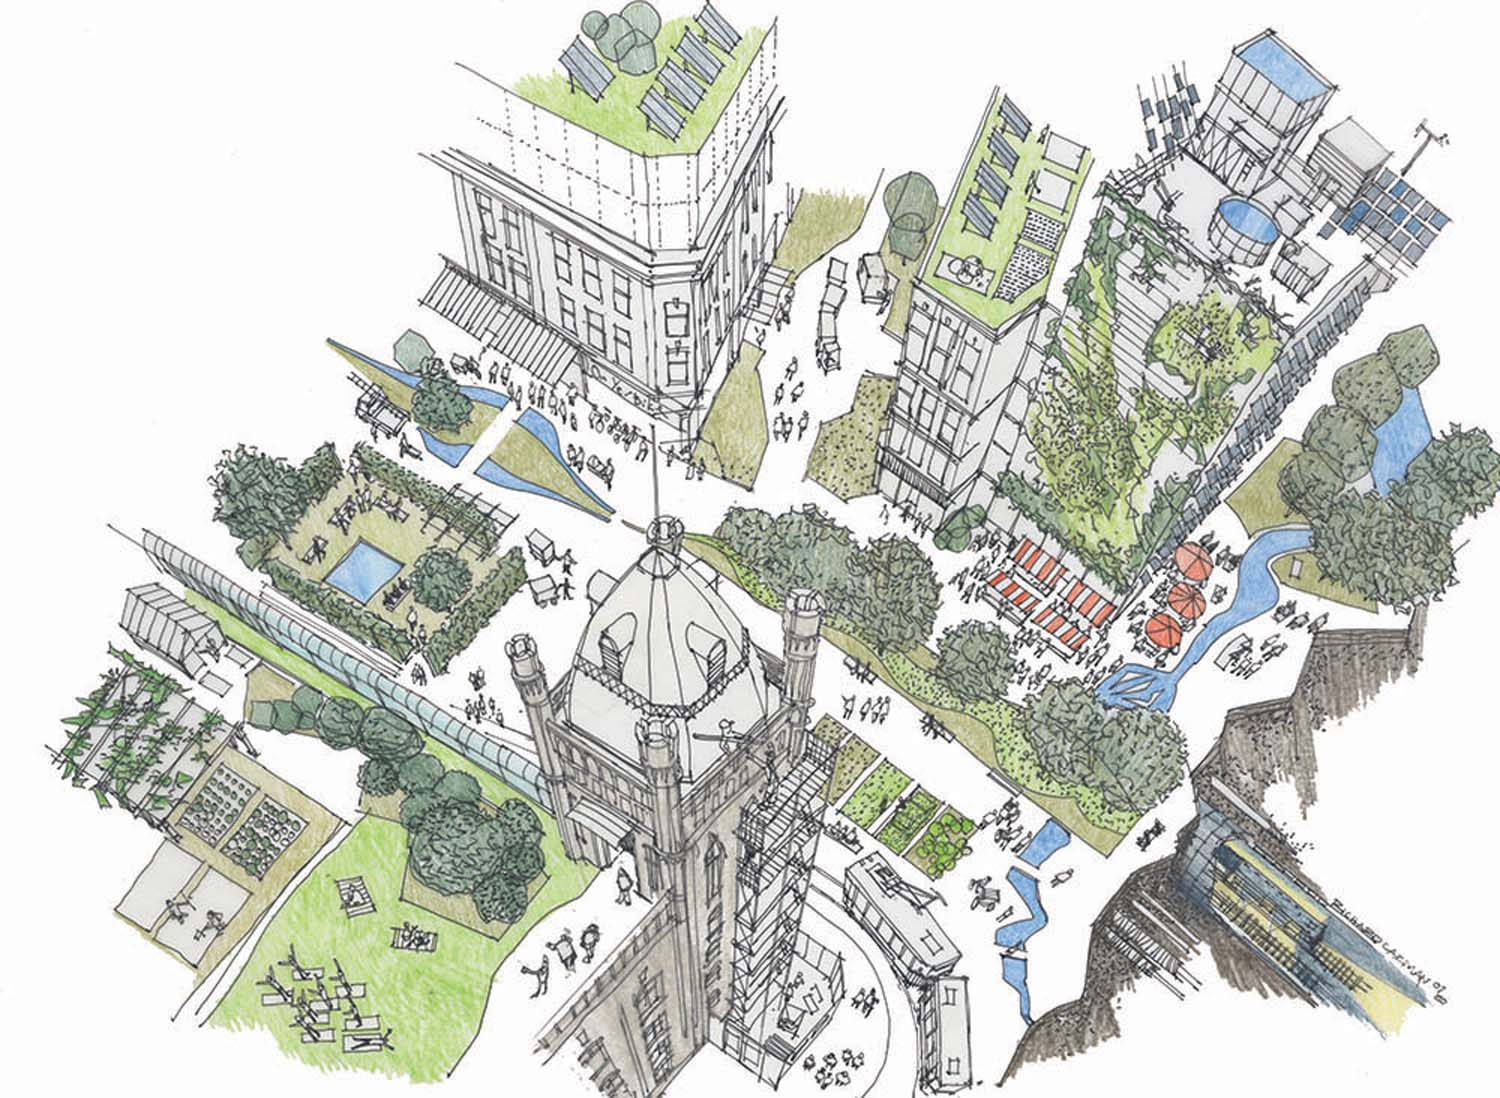 A colourful aerial sketch of high risers, green spaces, rivers and people in a city centre designed to adapt to a climate emergency.